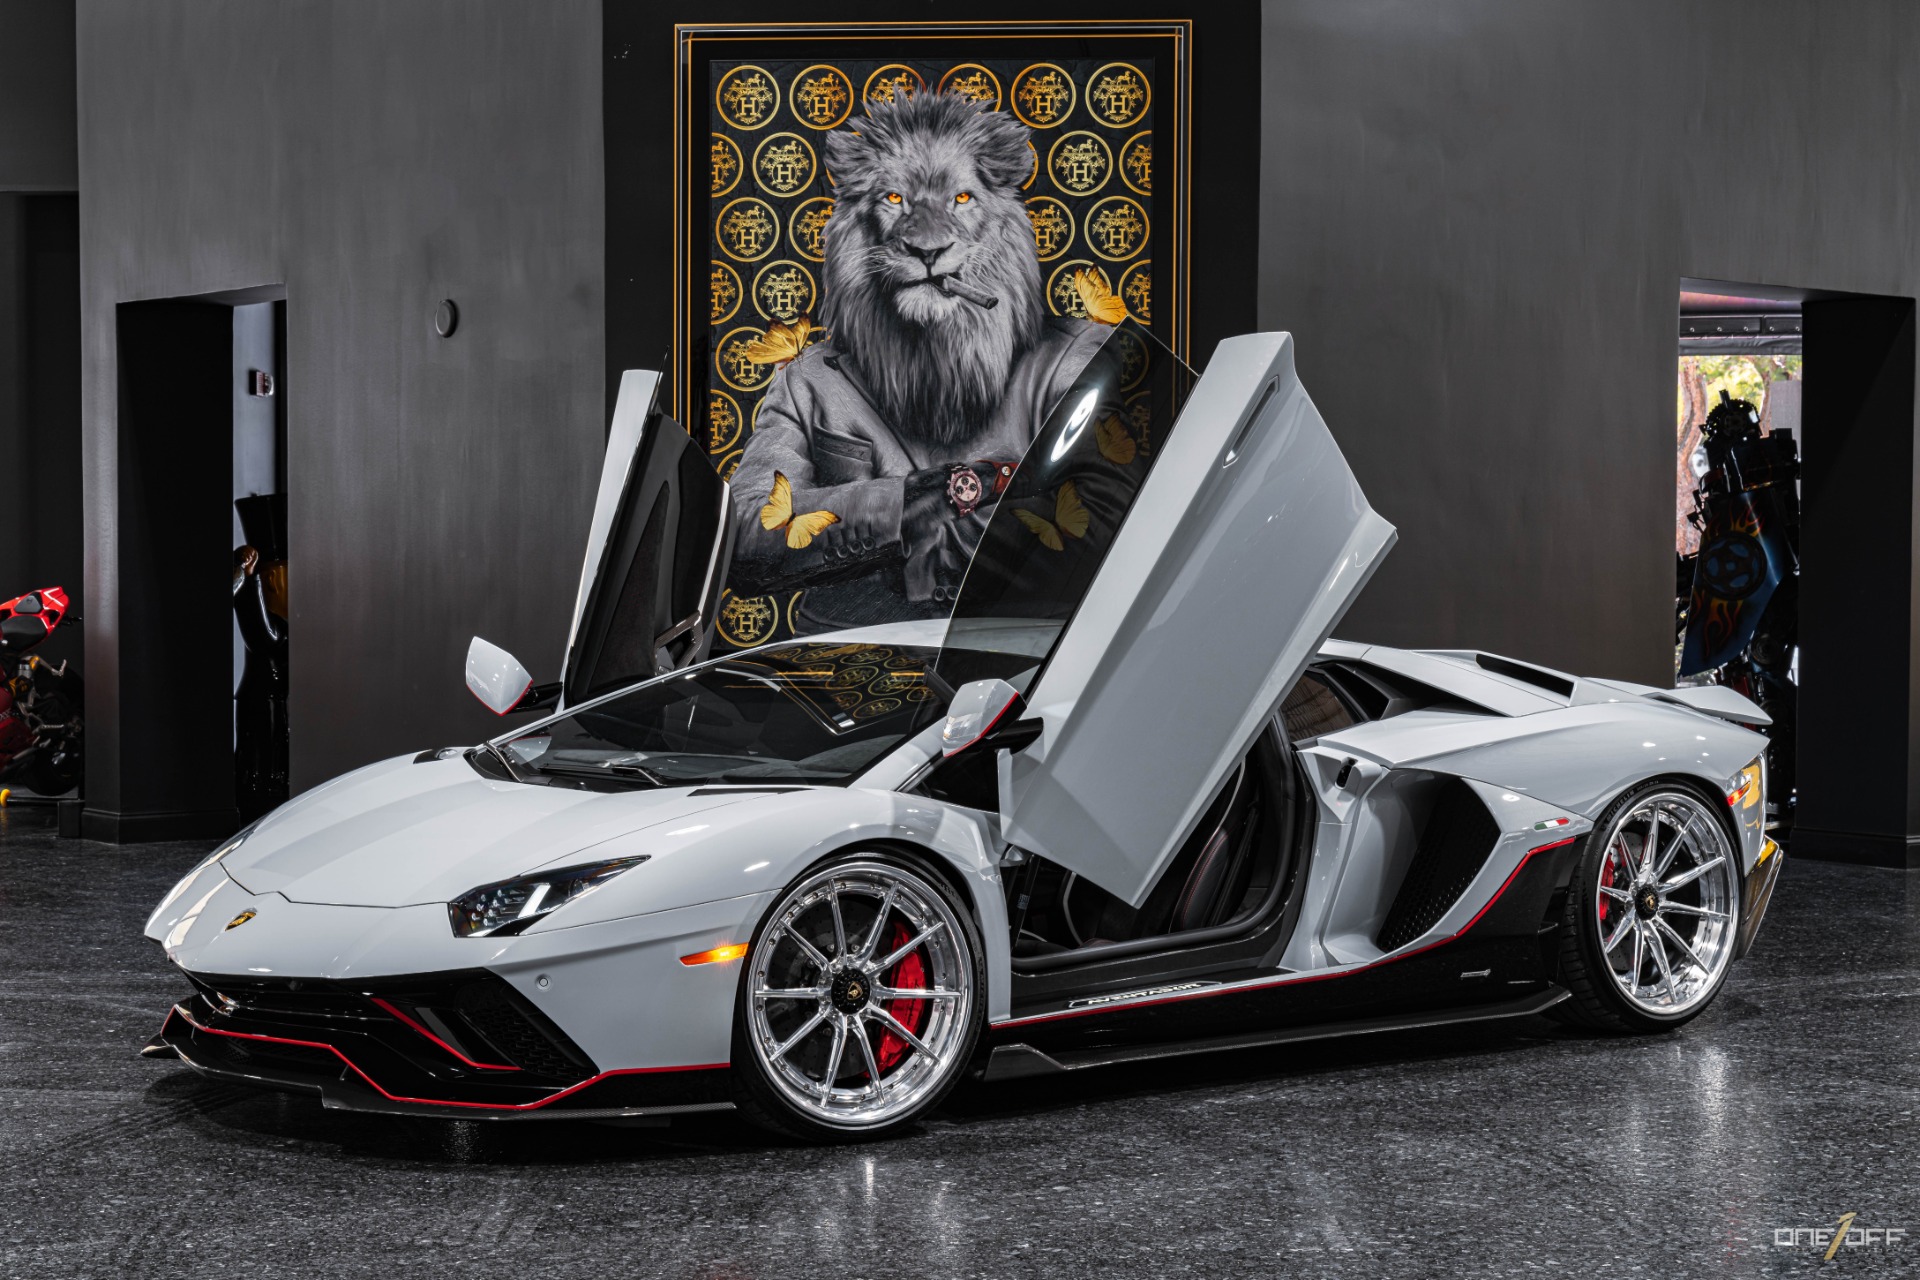 Everything you need to know about the Lamborghini Aventador Ultimae